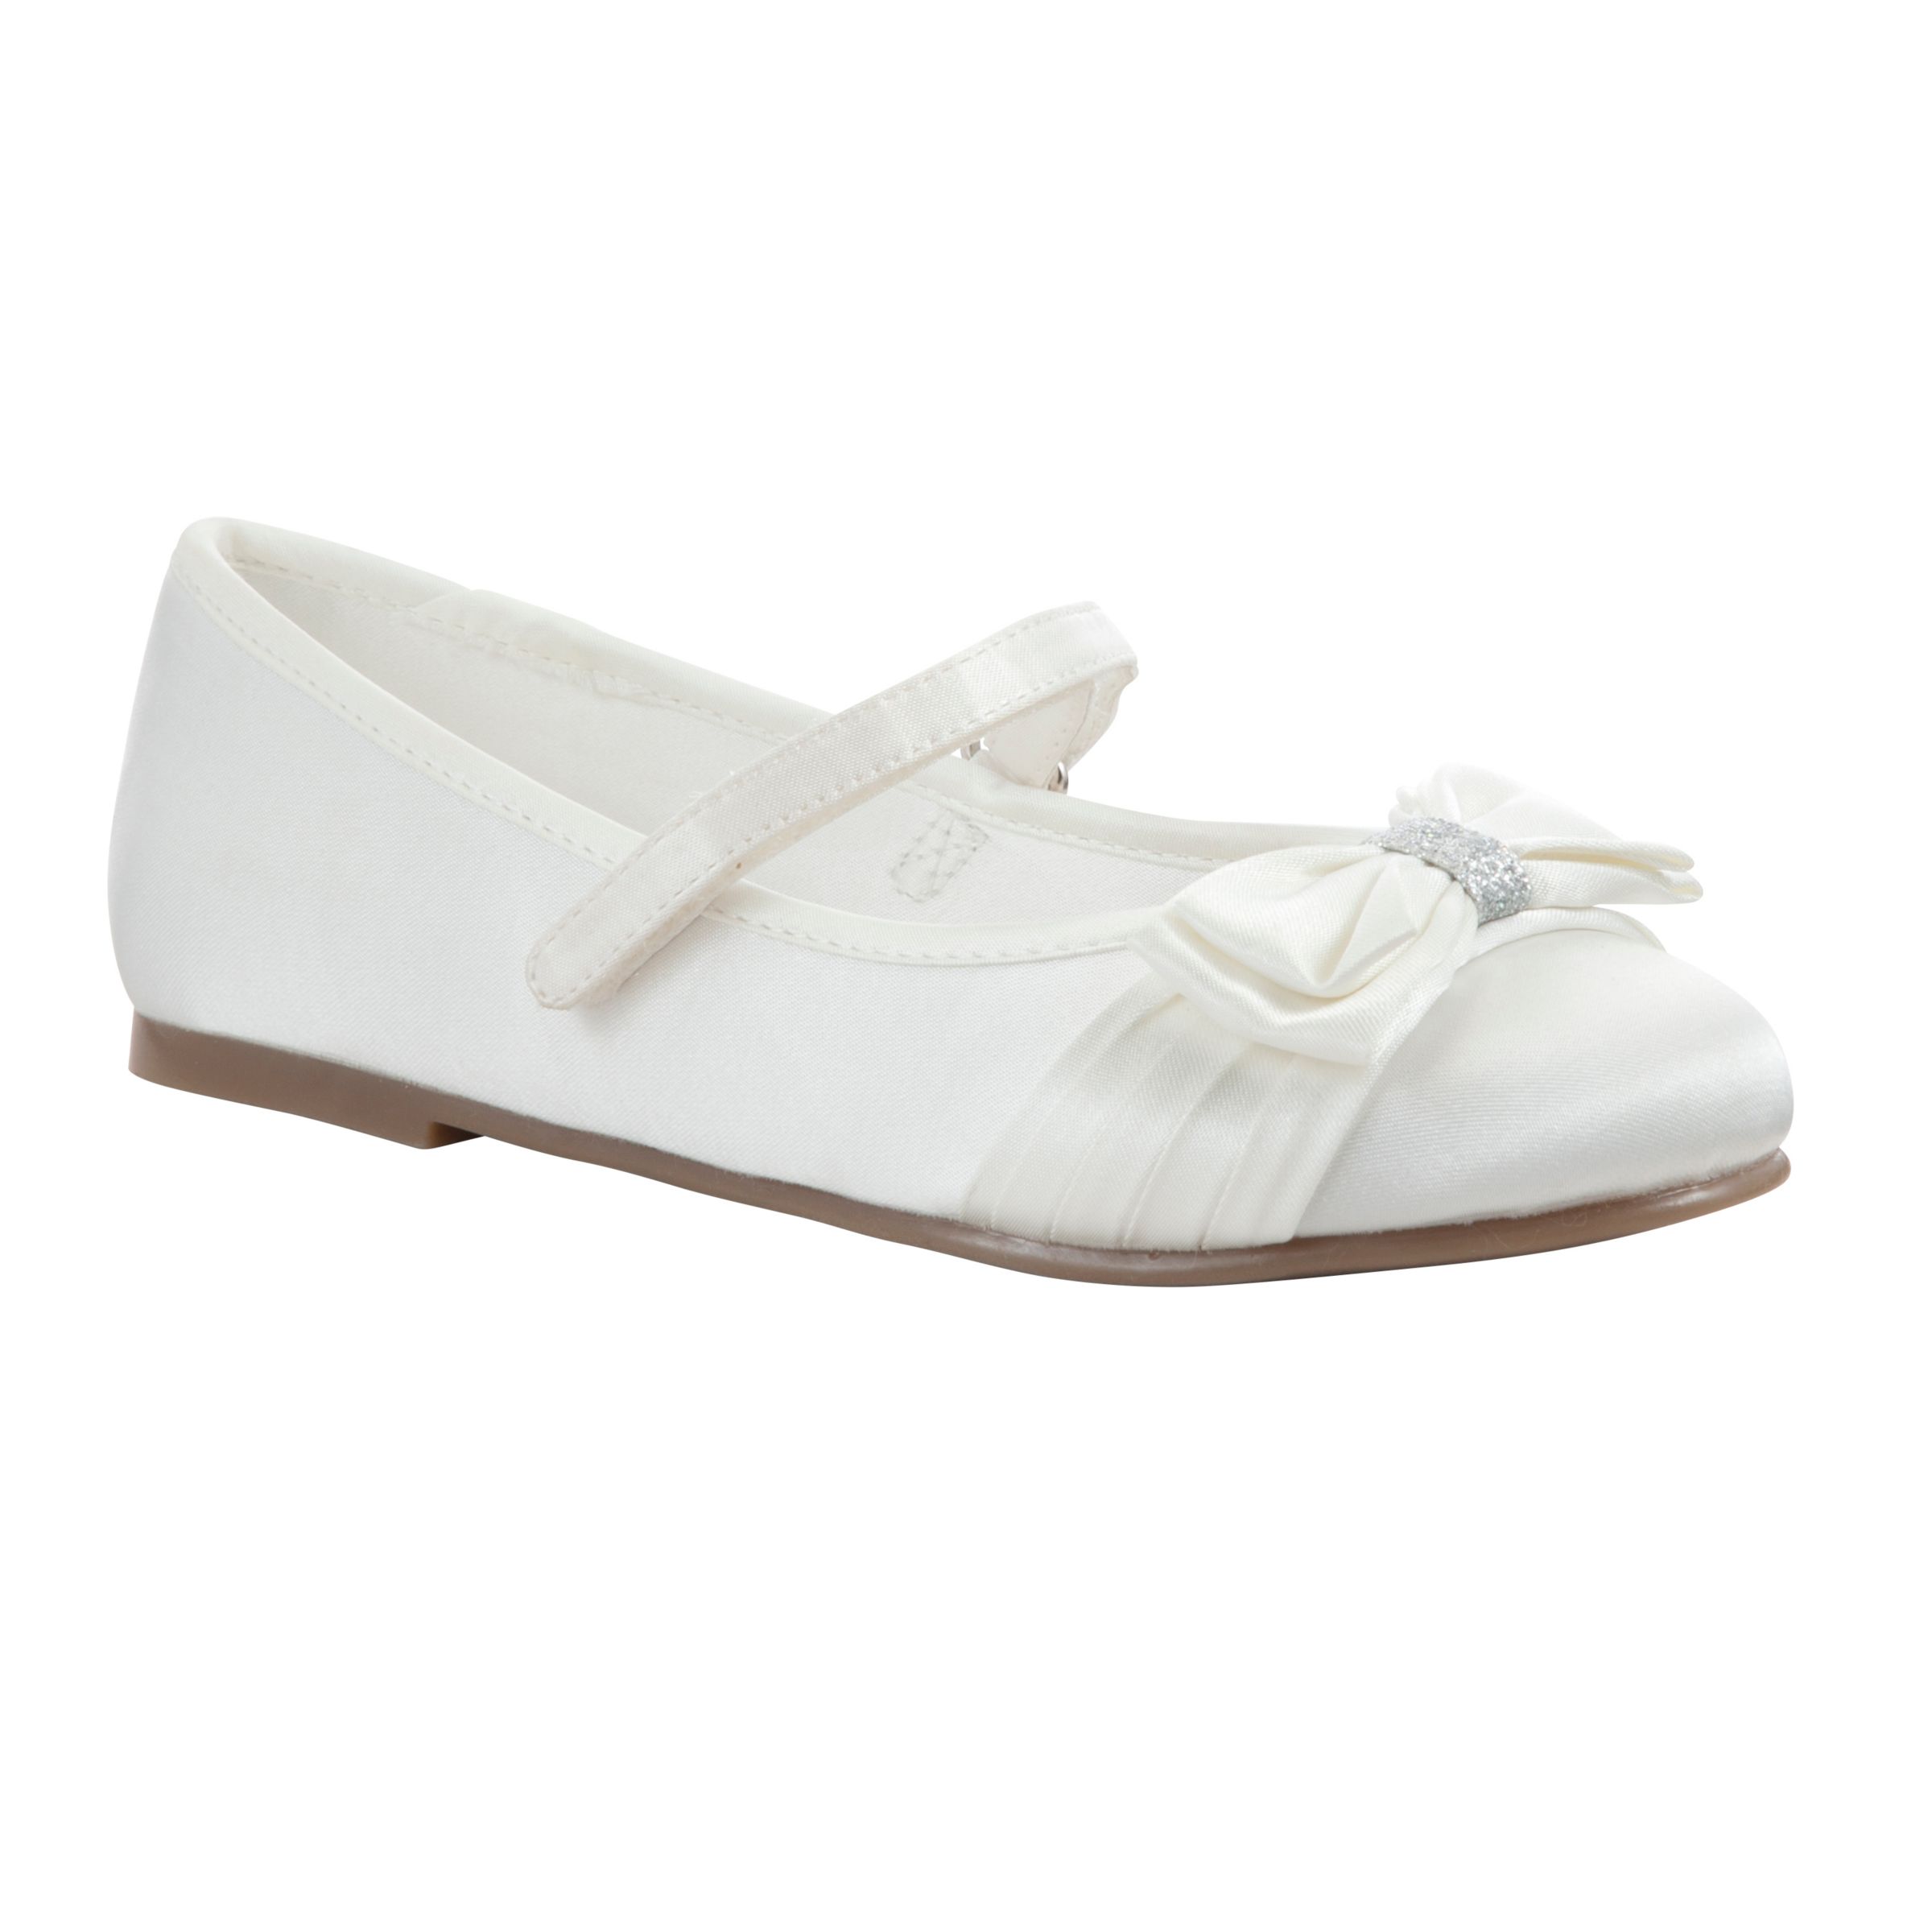 John Lewis & Partners Bow Ballet Bridesmaids' Shoes, Ivory/Silver